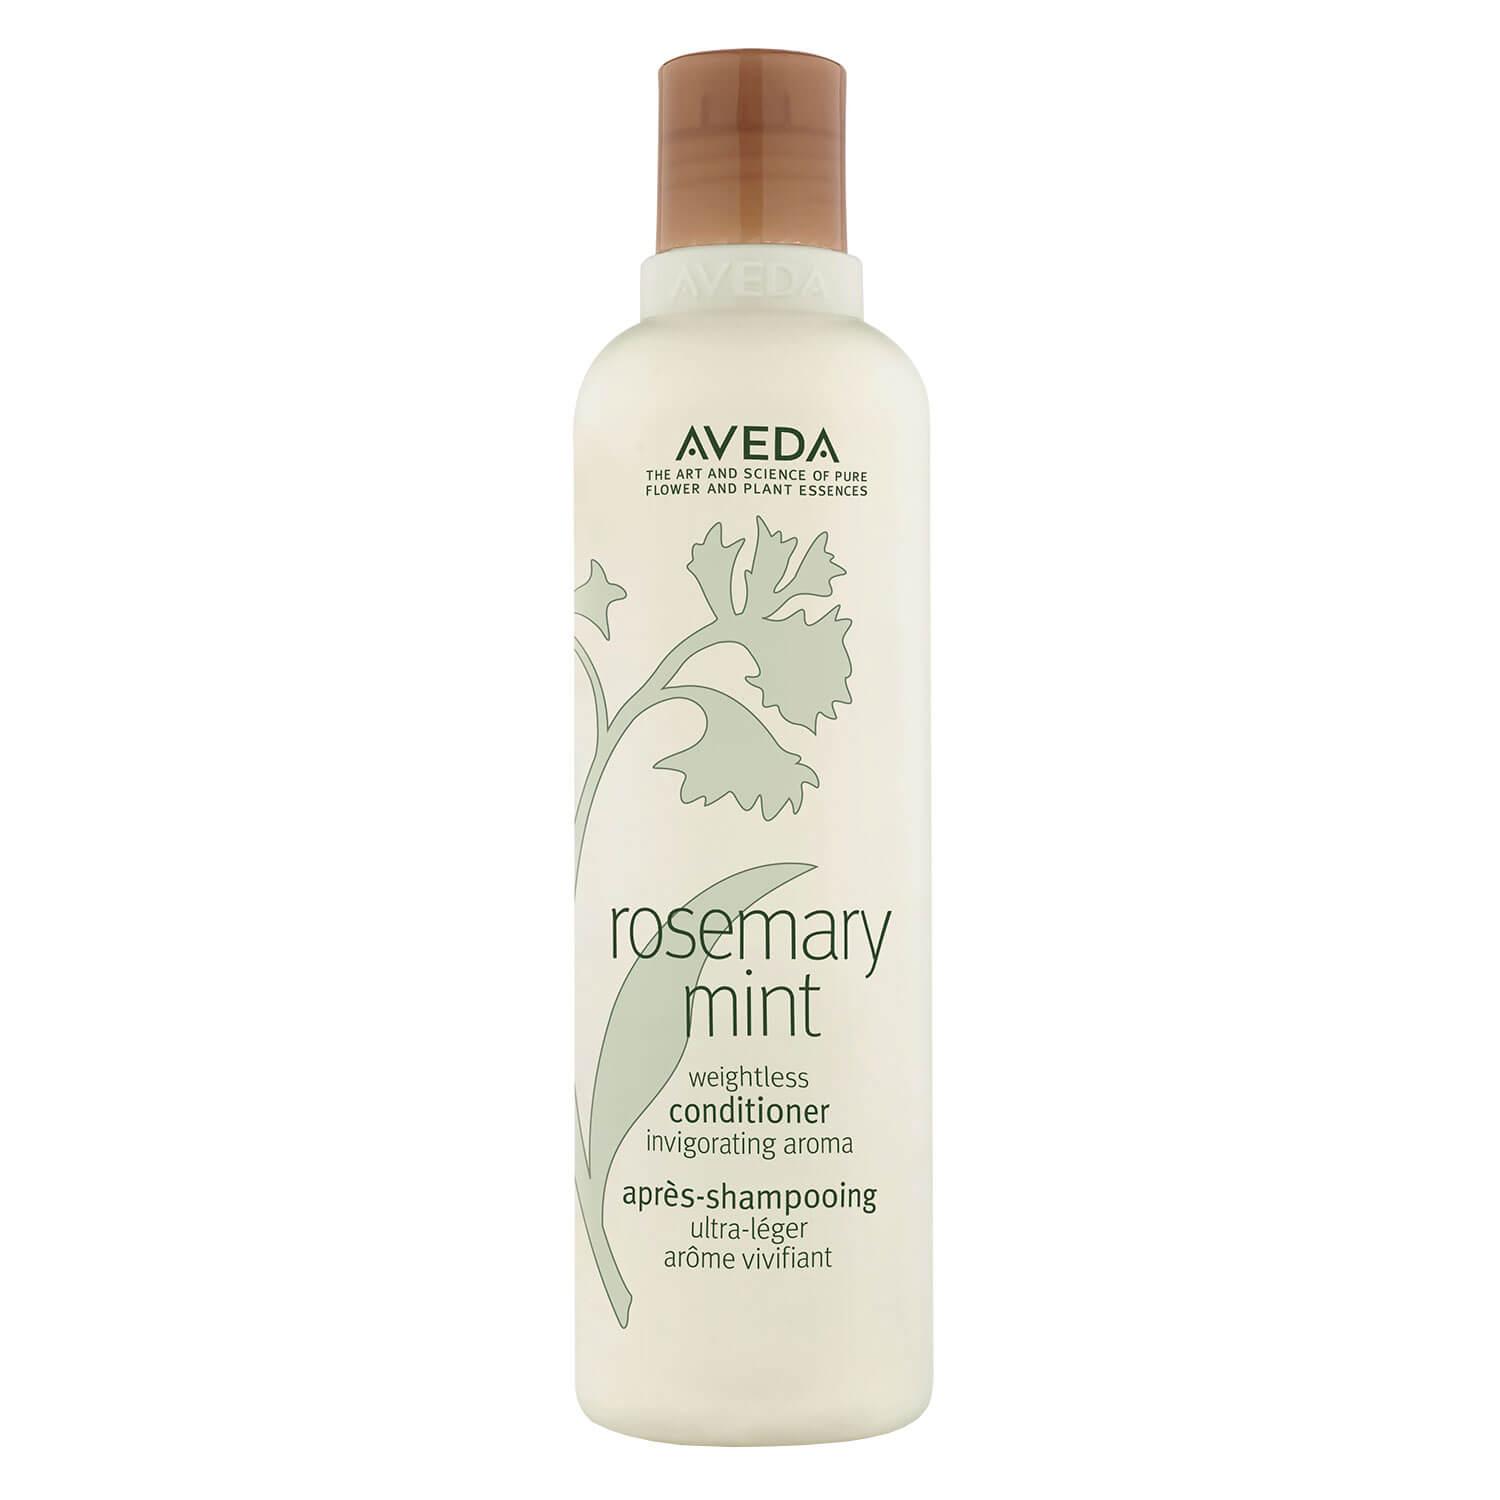 rosemary mint - weightless conditioner